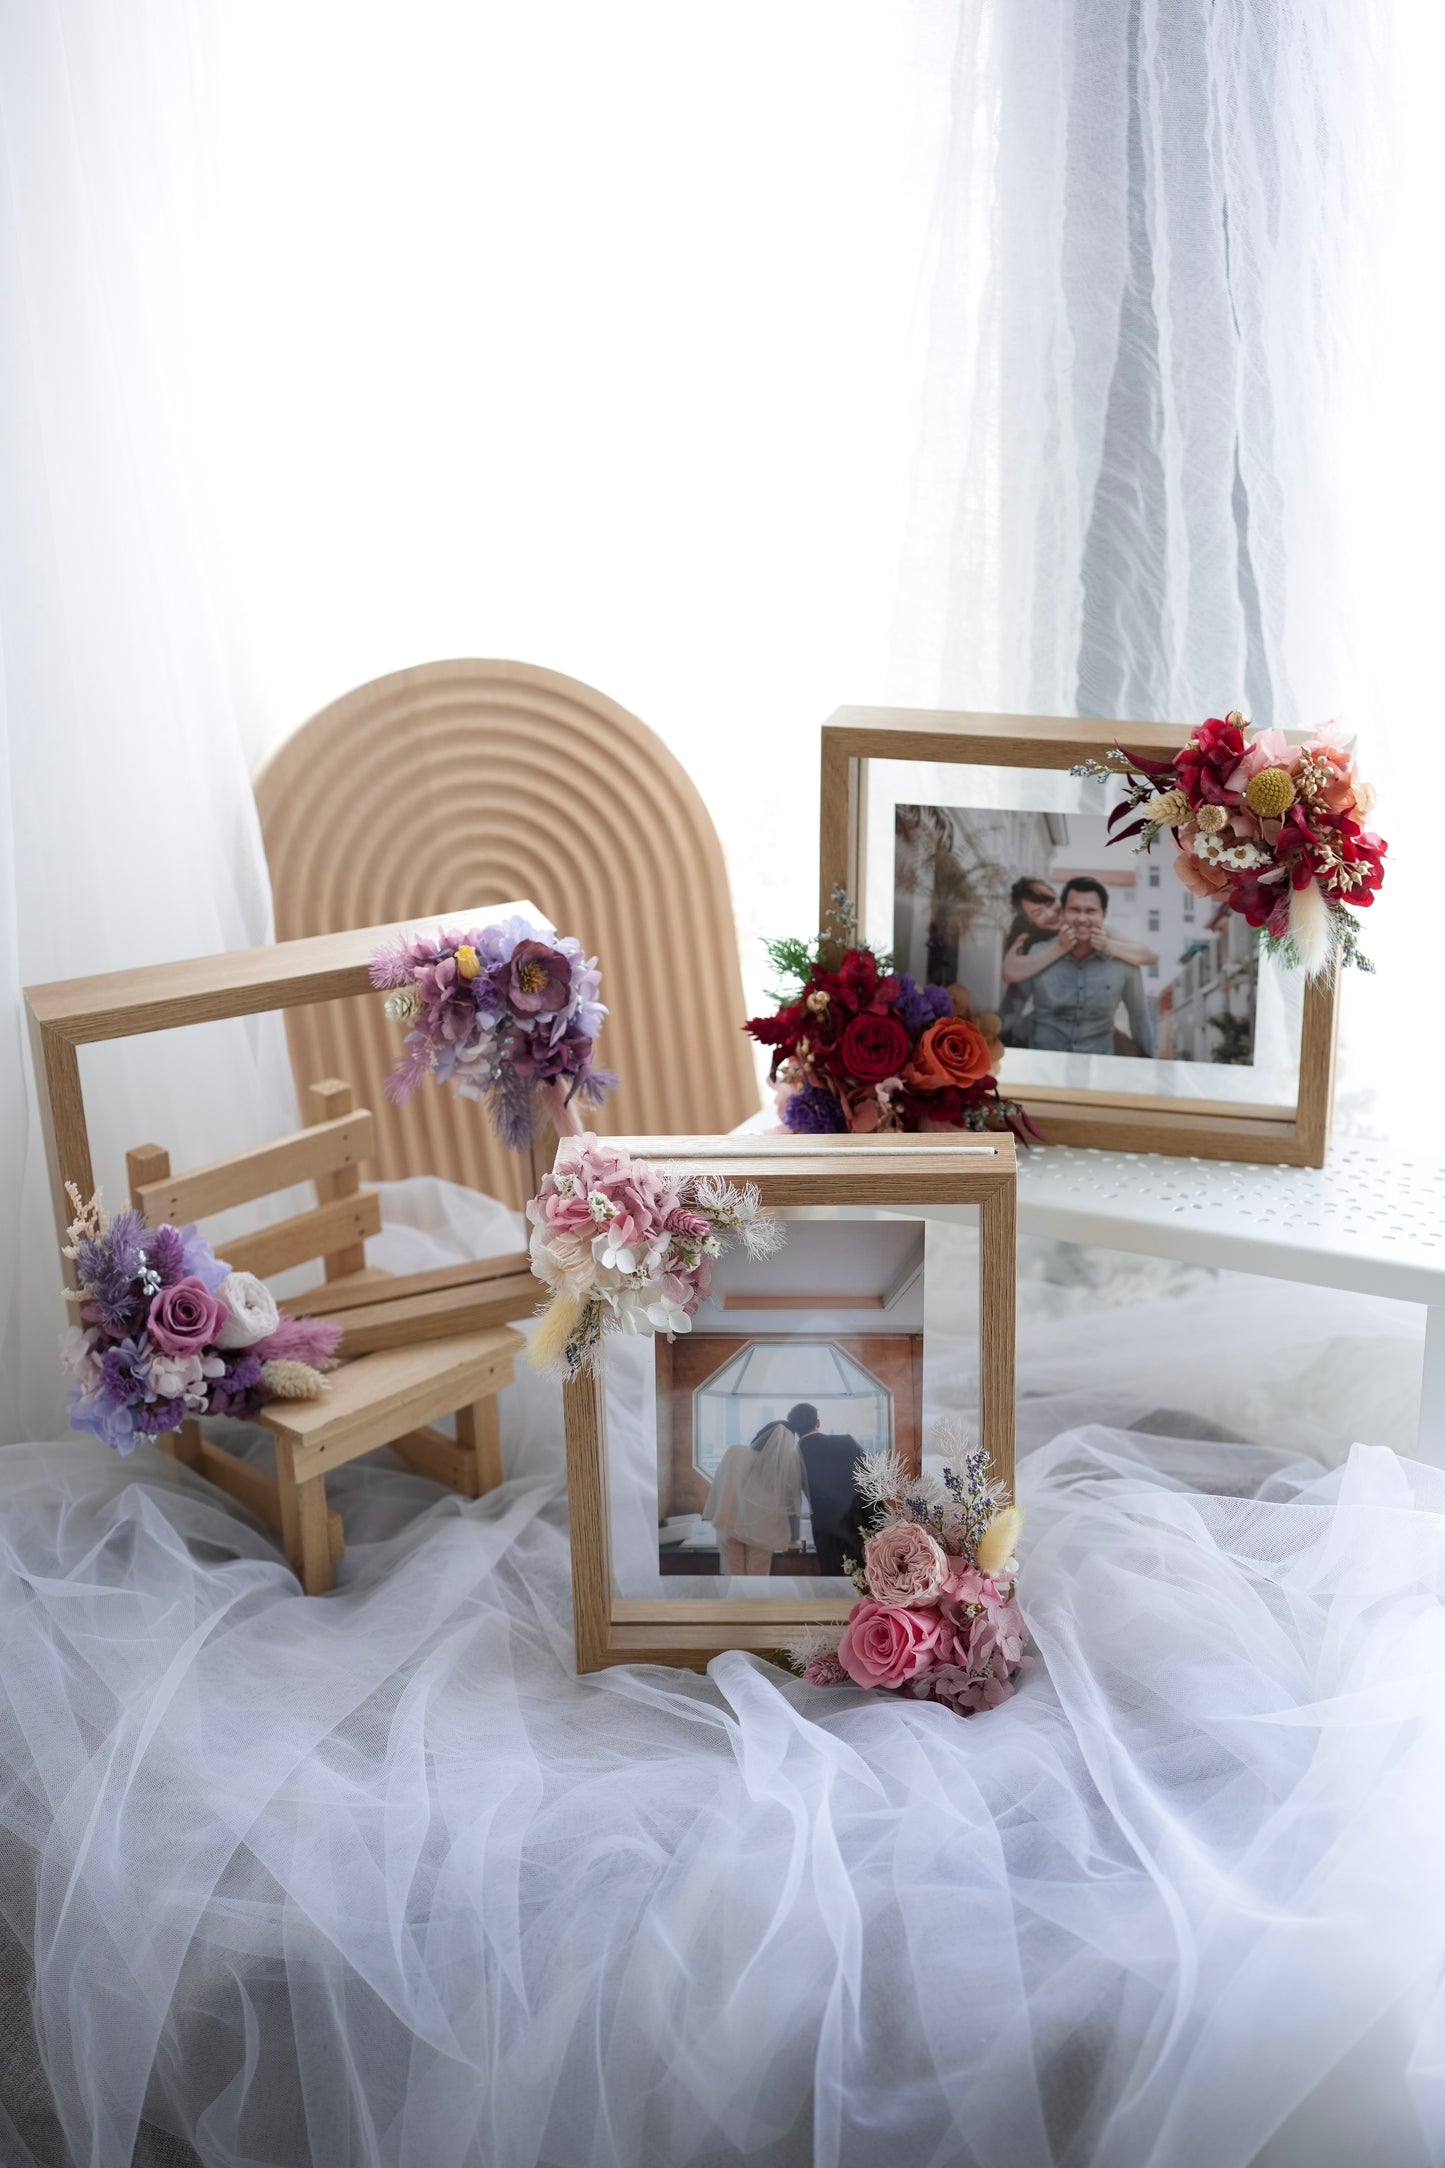 Floral Photo Frame - Berry Bliss